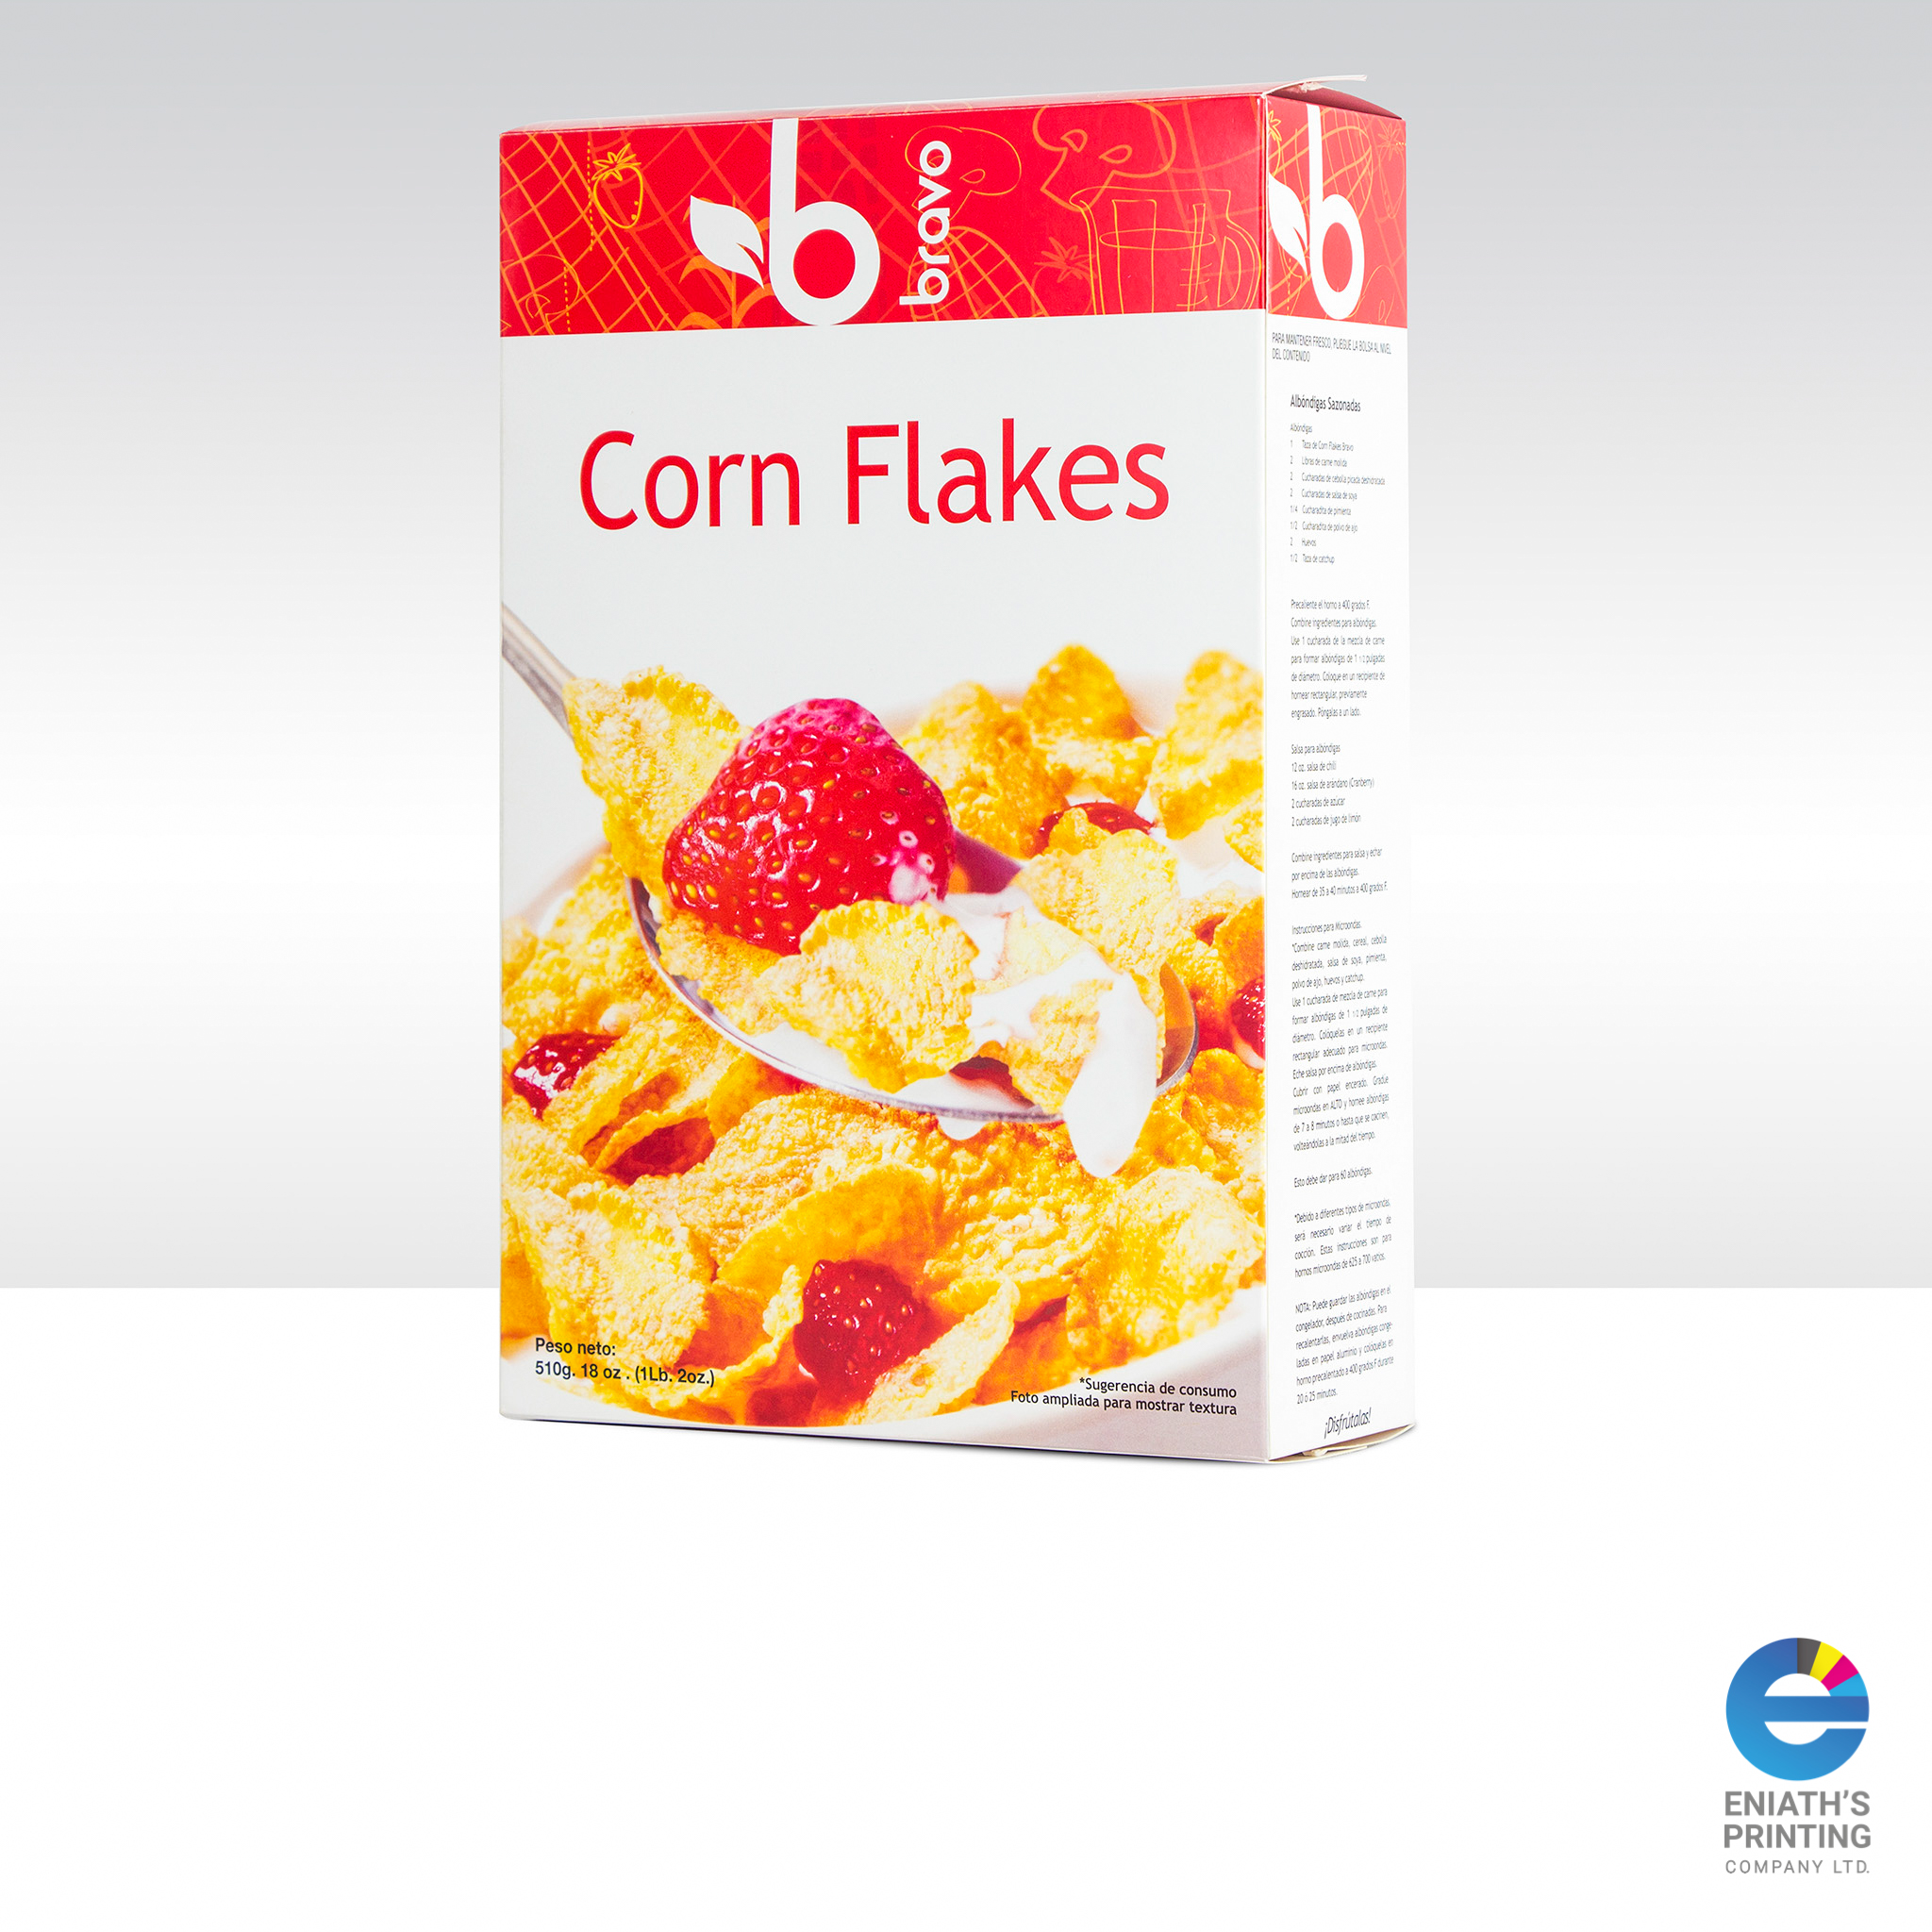 Corn Flakes Packaging - Printed by Eniath's Printing Co. Ltd.